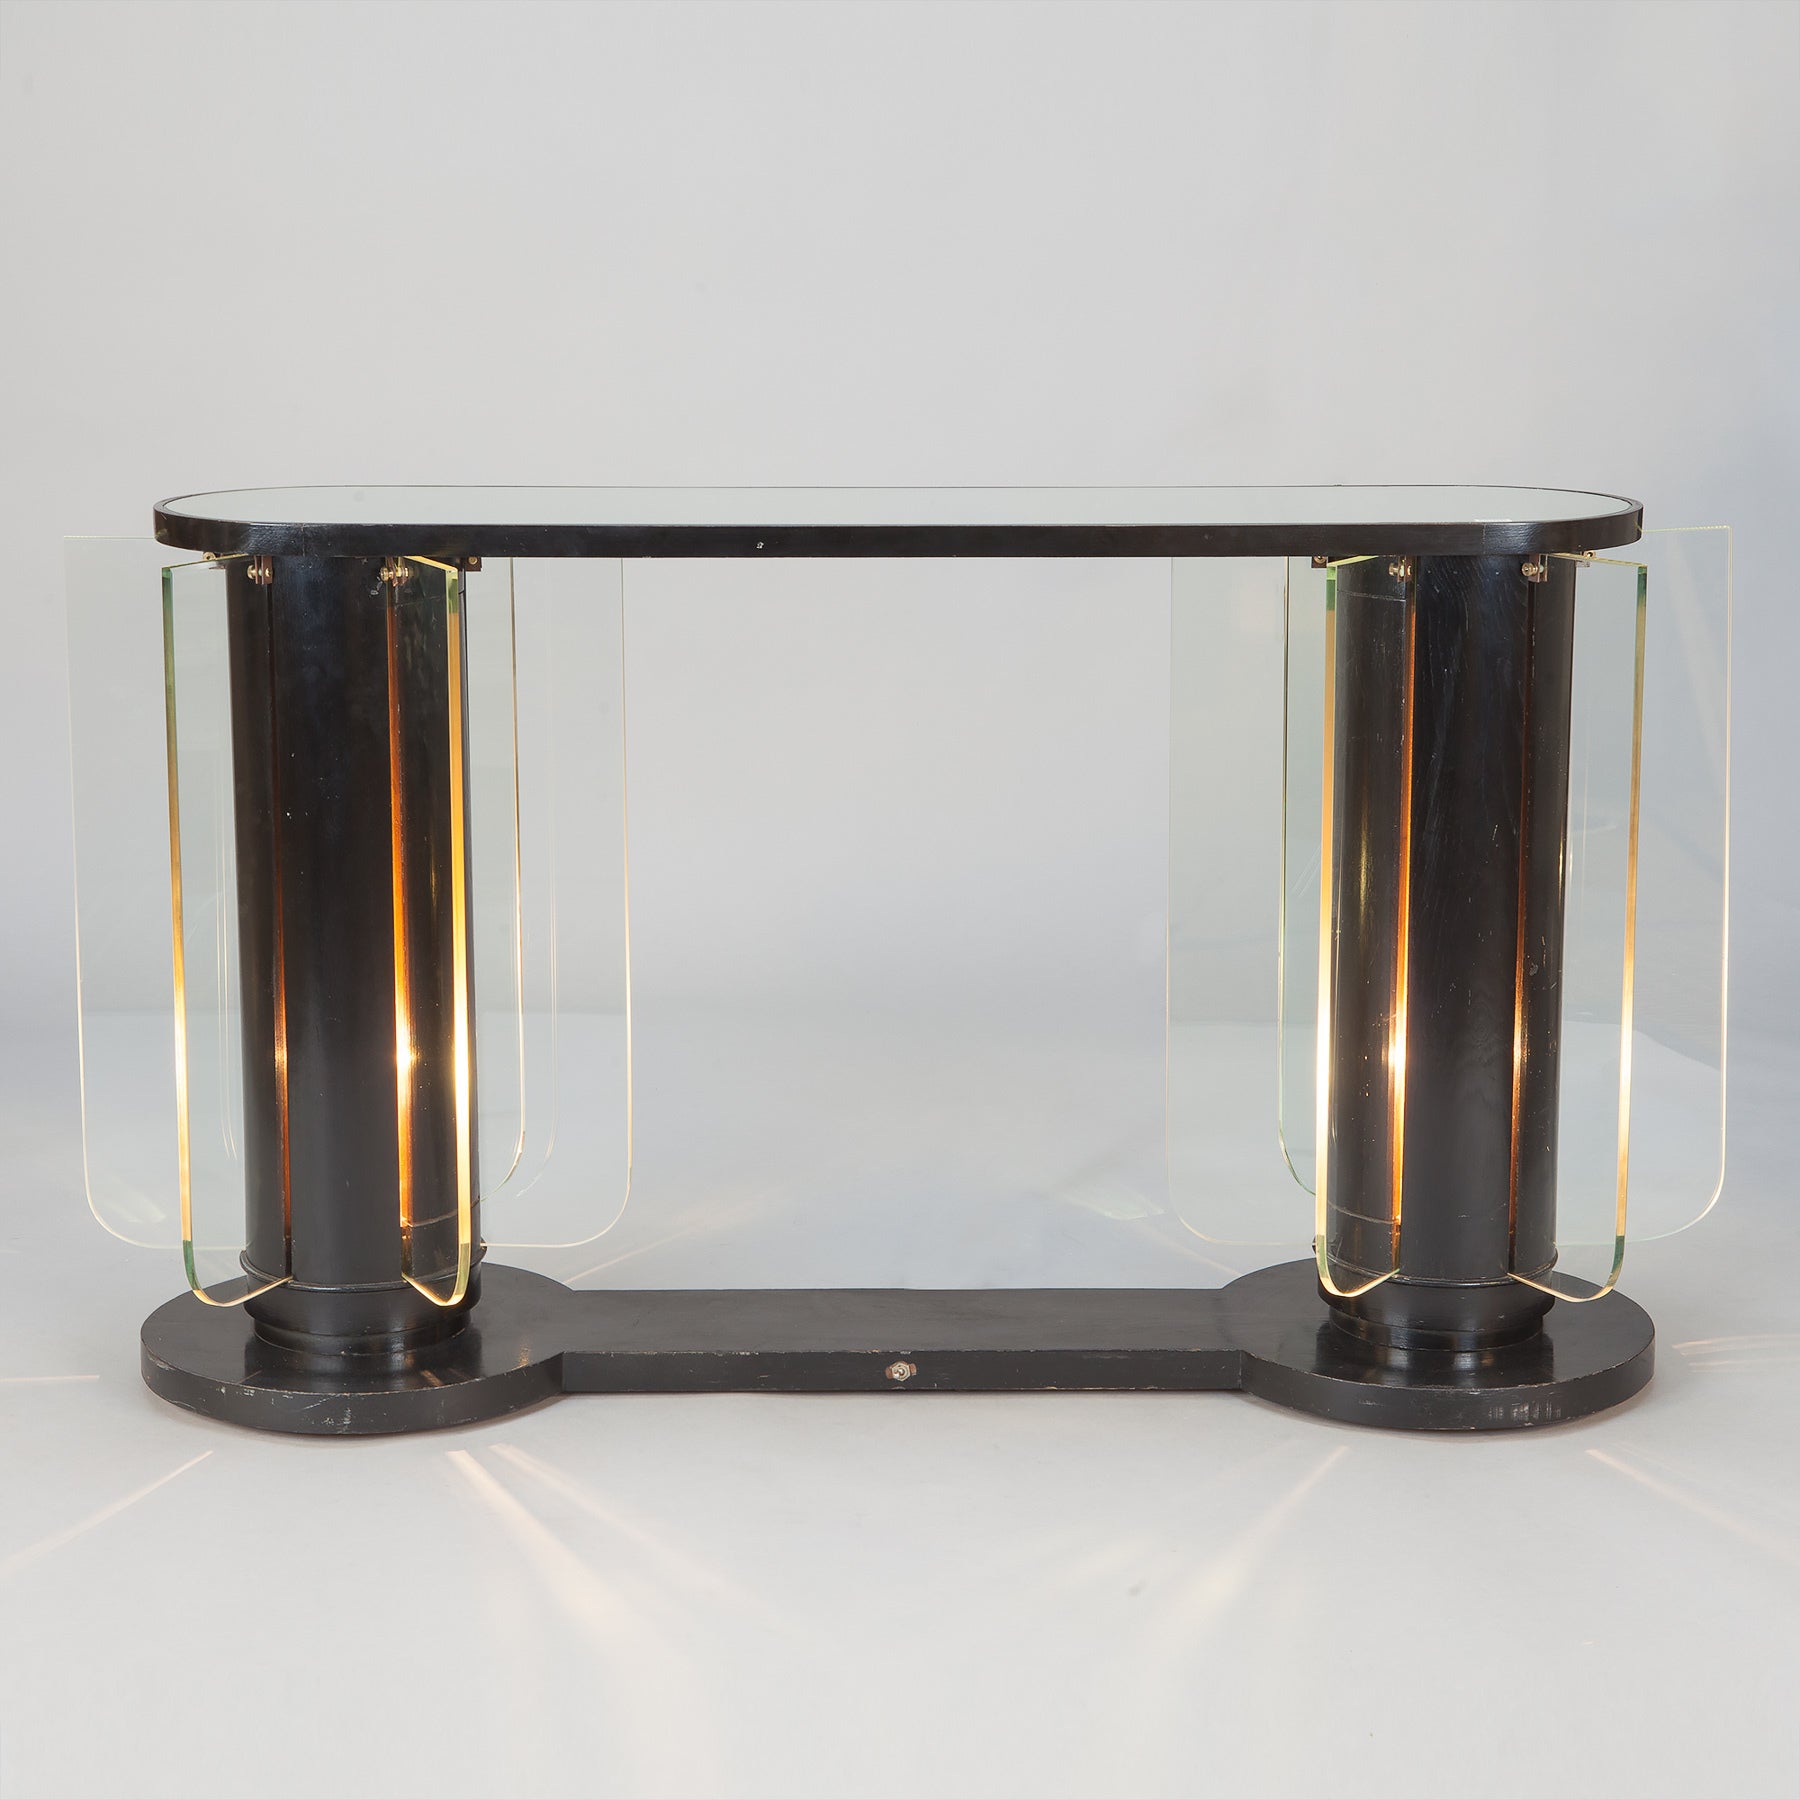 French Art Deco Console with Light Up Supports and Glass Inserts